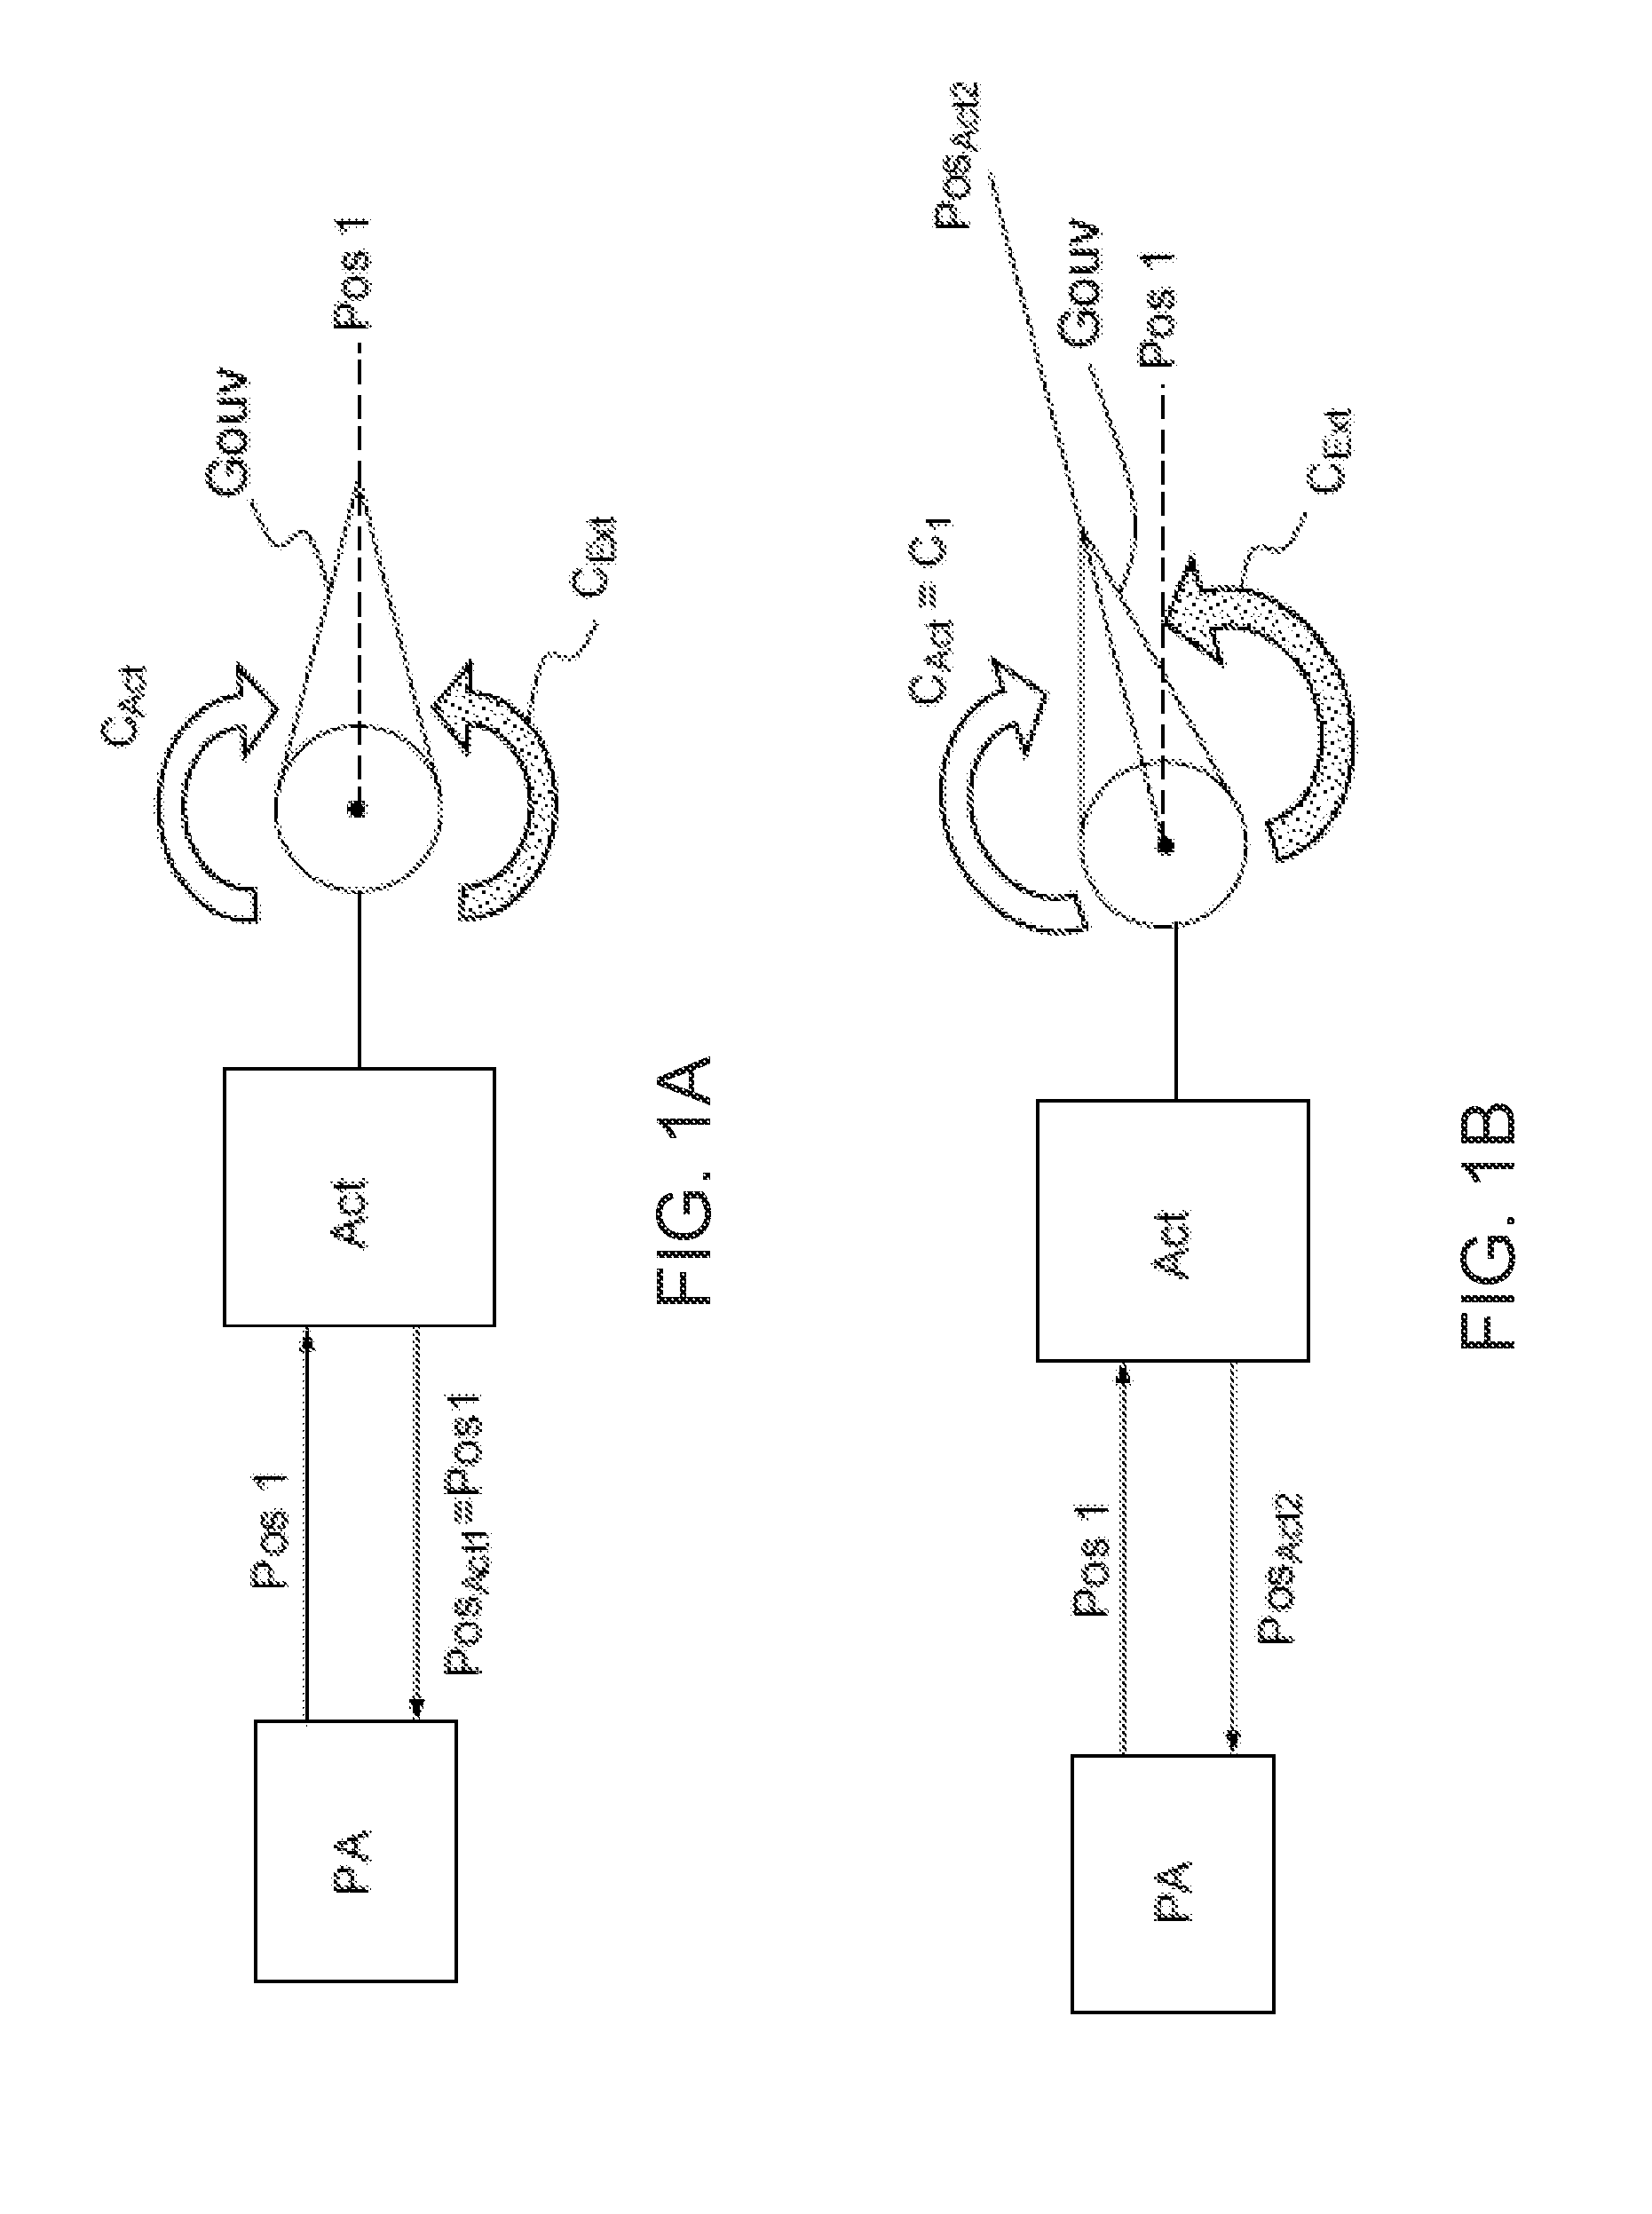 Method for regulating the torque of a control surface actuator with a controlled angular position on an aircraft with mechanical flight control